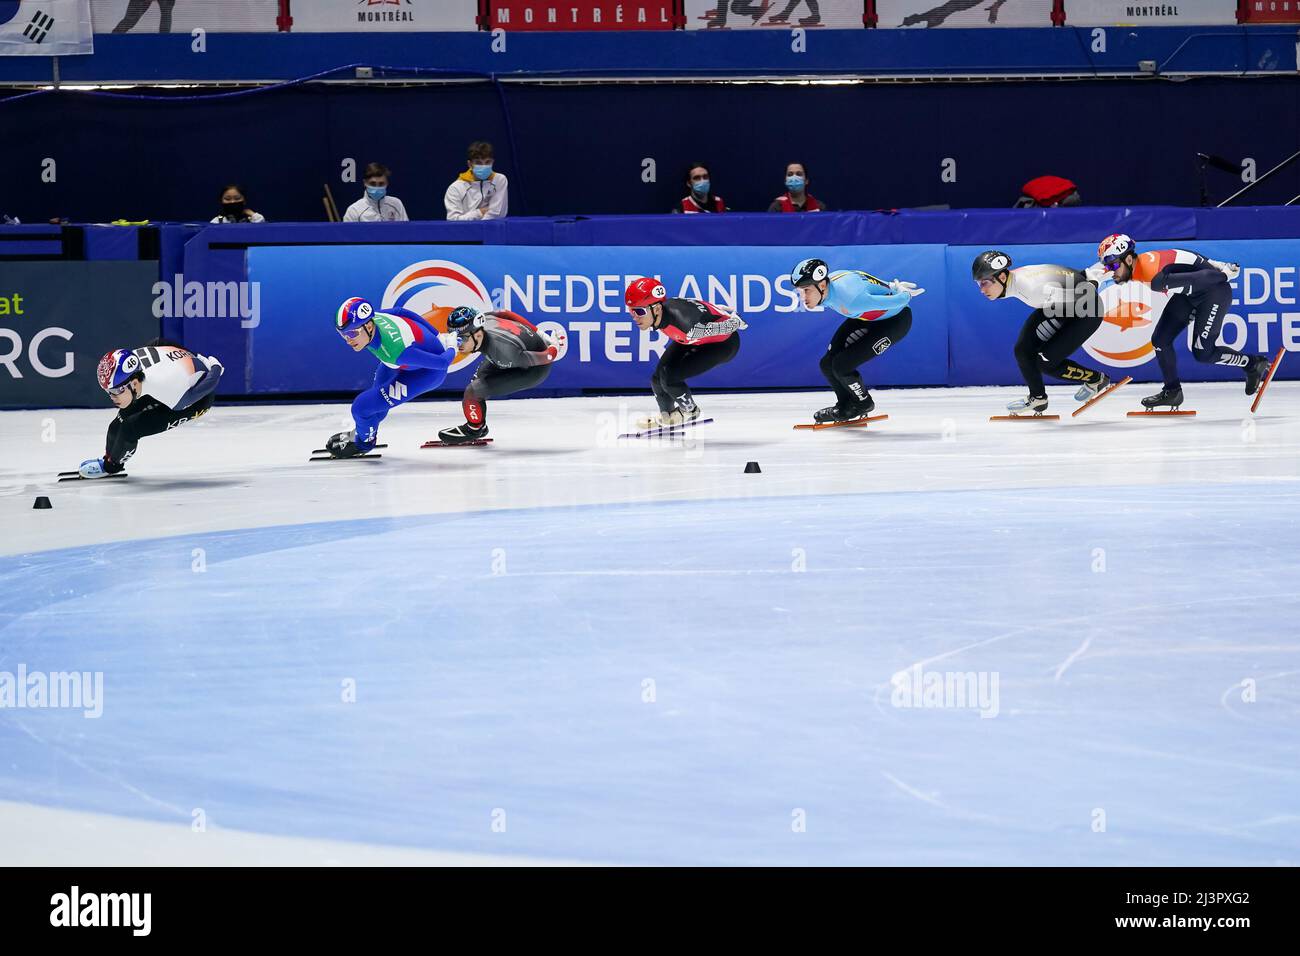 MONTREAL, CANADA - APRIL 9: June Seo Lee of the Republic of Korea, Luca Spechenhauser of Italy, Pascal Dion of Canada, Furkan Akar of Turkey, Stijn Desmet of Belgium, Shaoang Liu of of Hungary and Sjinkie Knegt of the Netherlands competing in the mens 1500m final A during Day 2 of the ISU World Short Track Championships at the Maurice Richard Arena on April 9, 2022 in Montreal, Canada (Photo by Andre Weening/Orange Pictures) Stock Photo